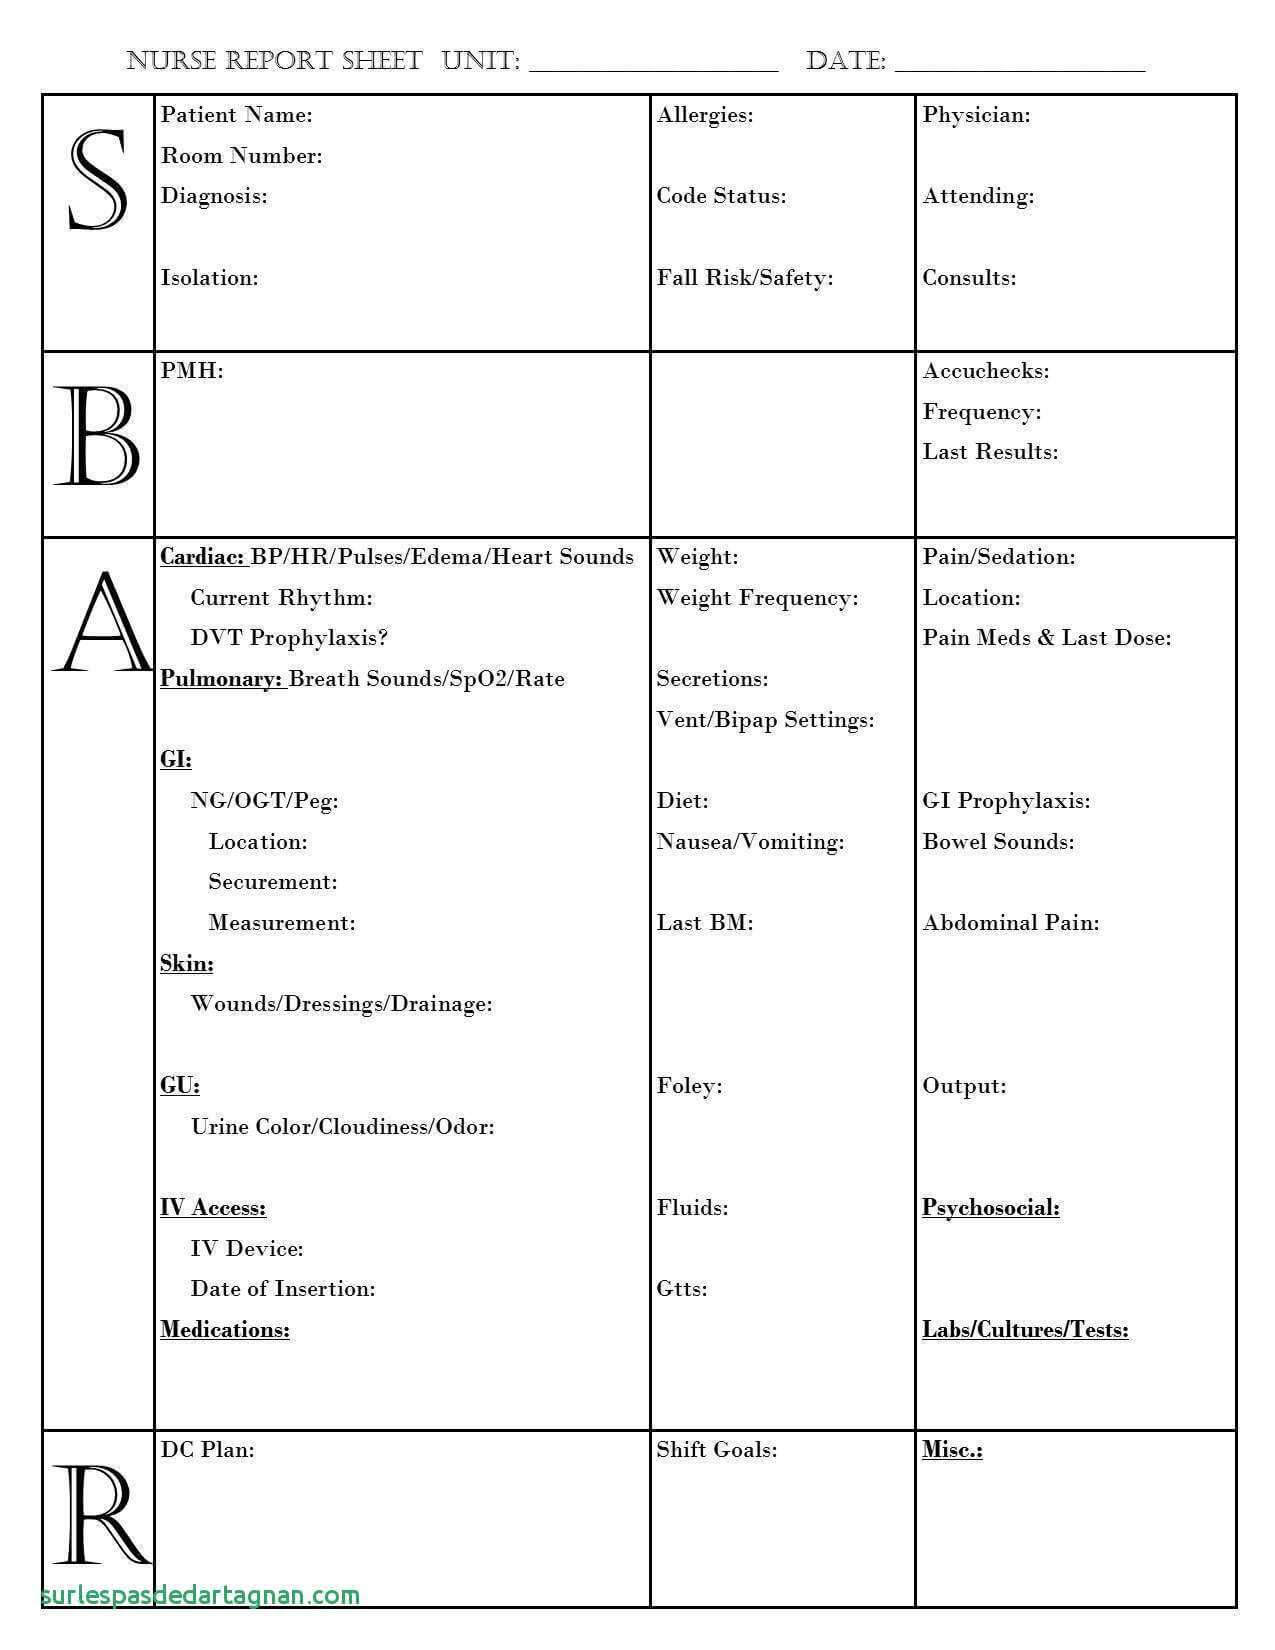 Nursing Report Sheet Template Together With Sbar Nurse With Nursing Report Sheet Templates